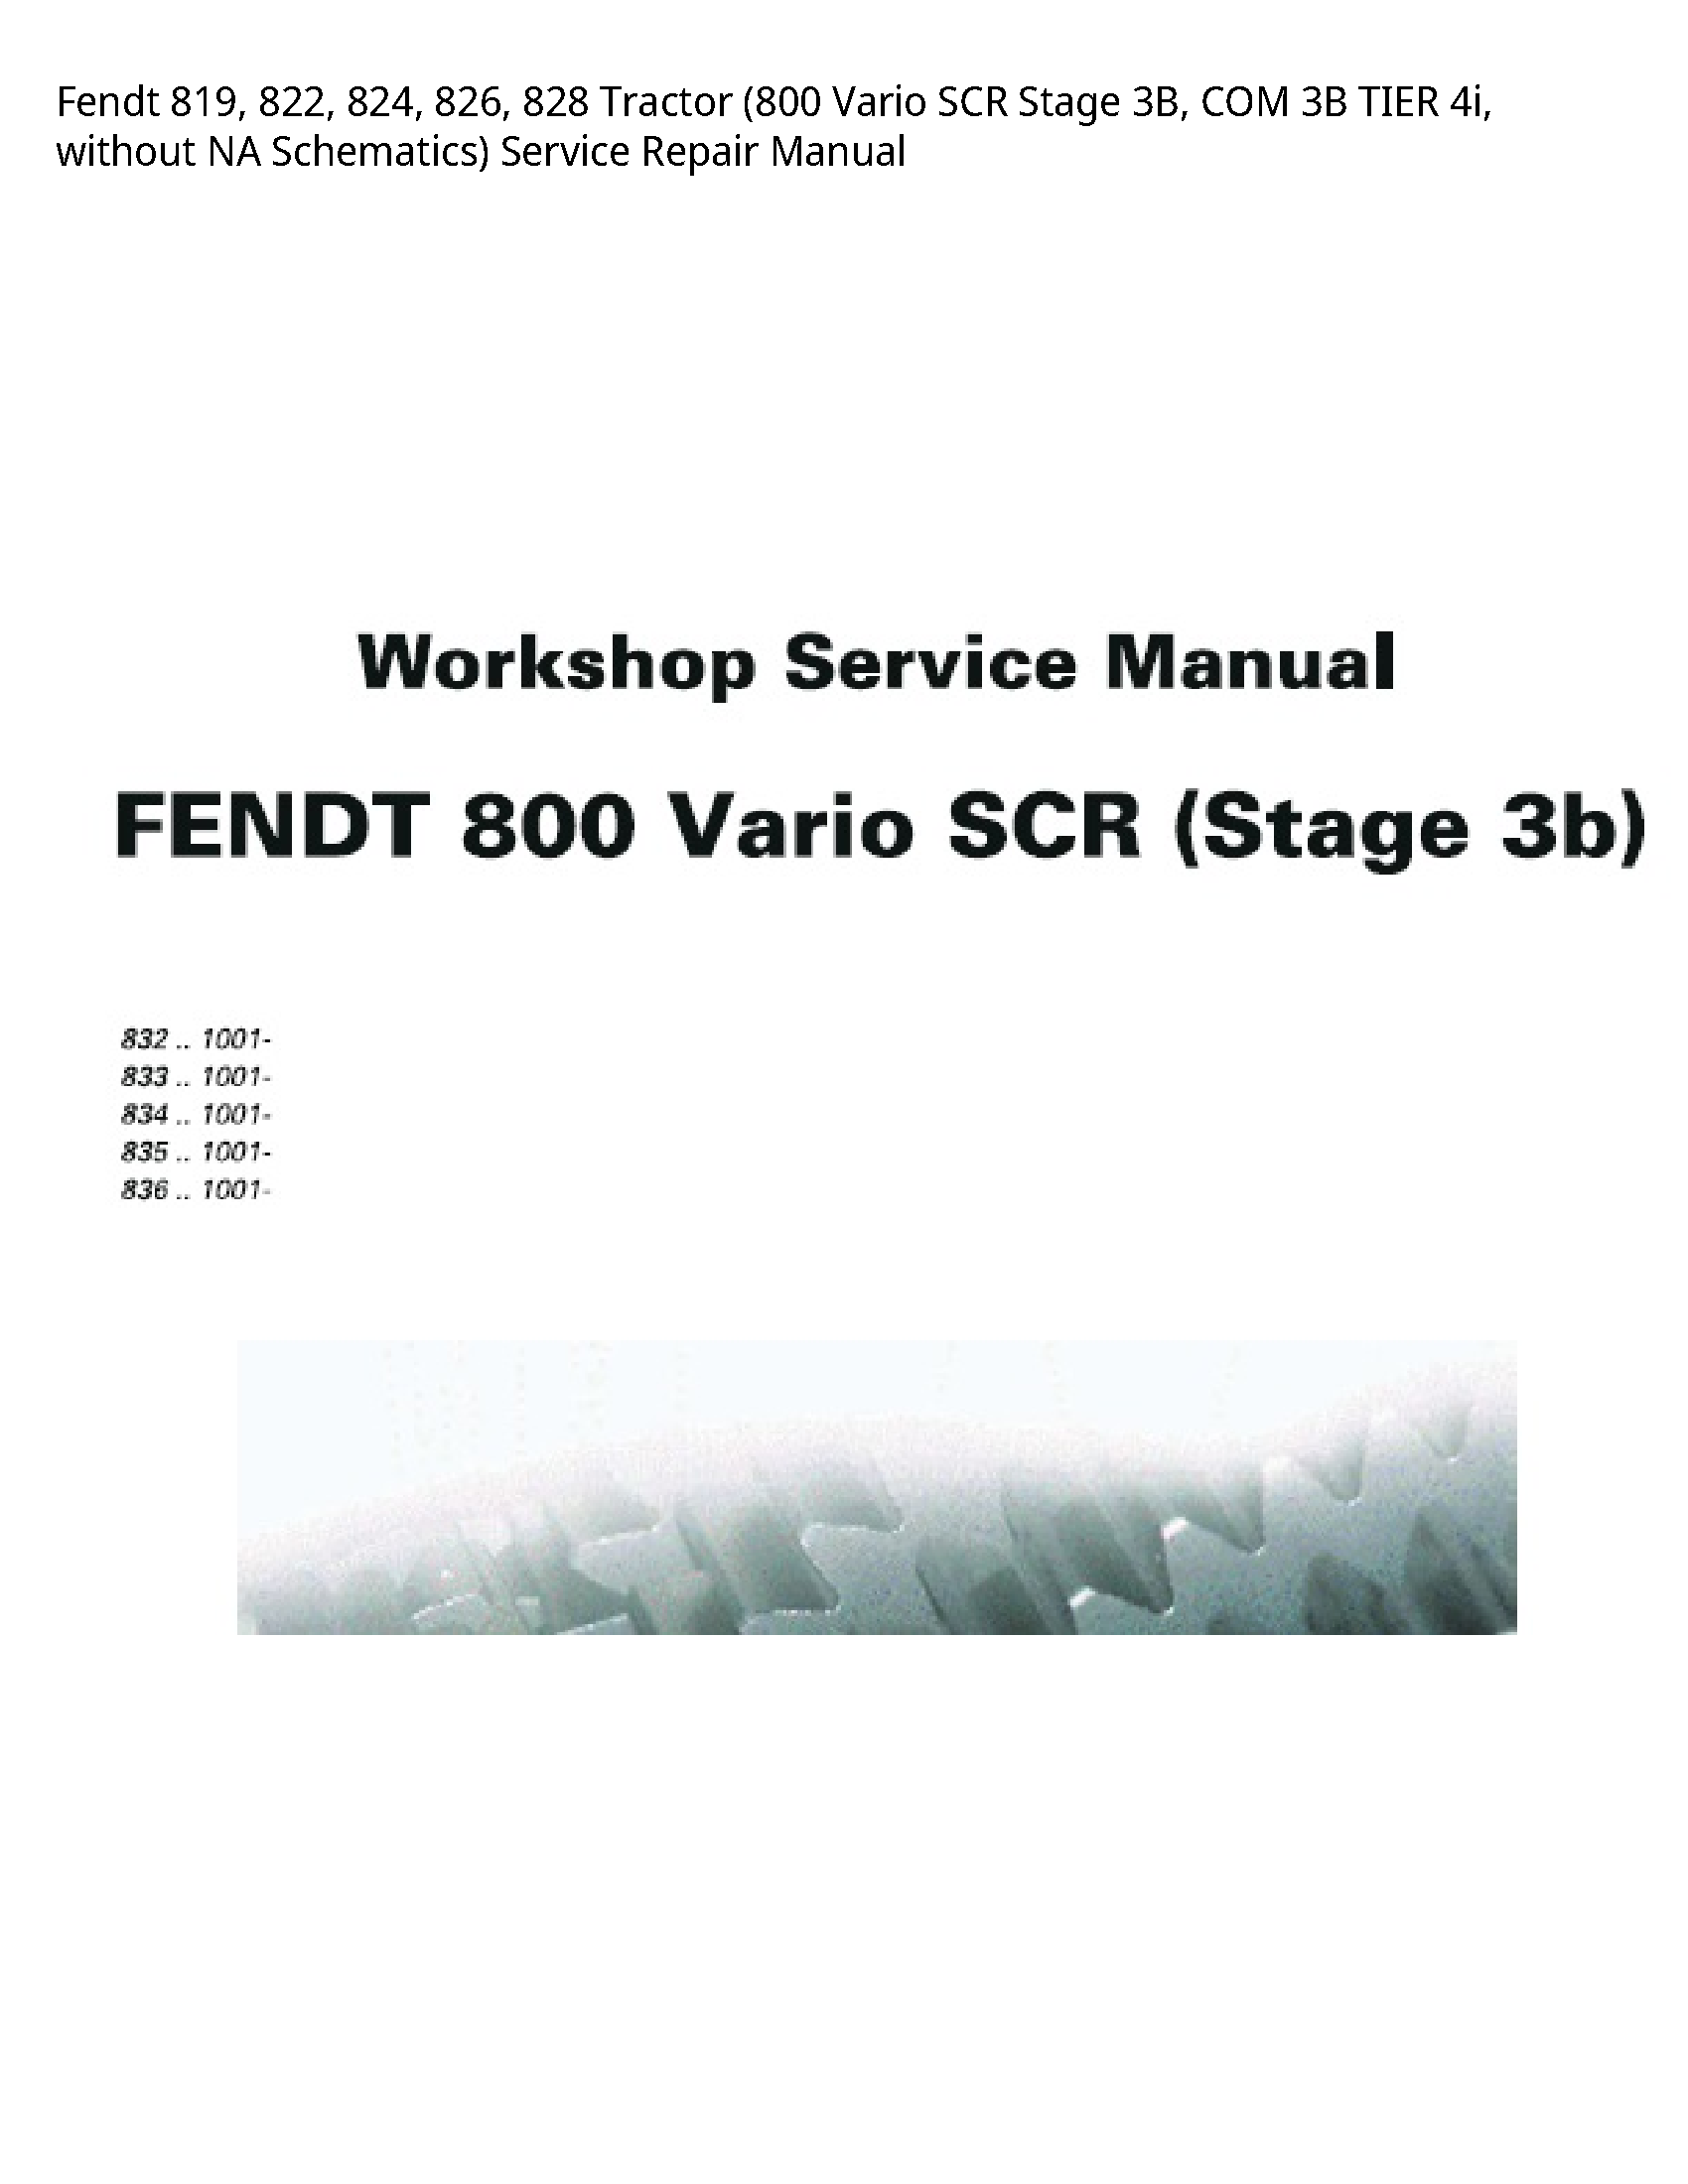 Fendt 819 Tractor Vario SCR Stage COM TIER without NA Schematics) manual